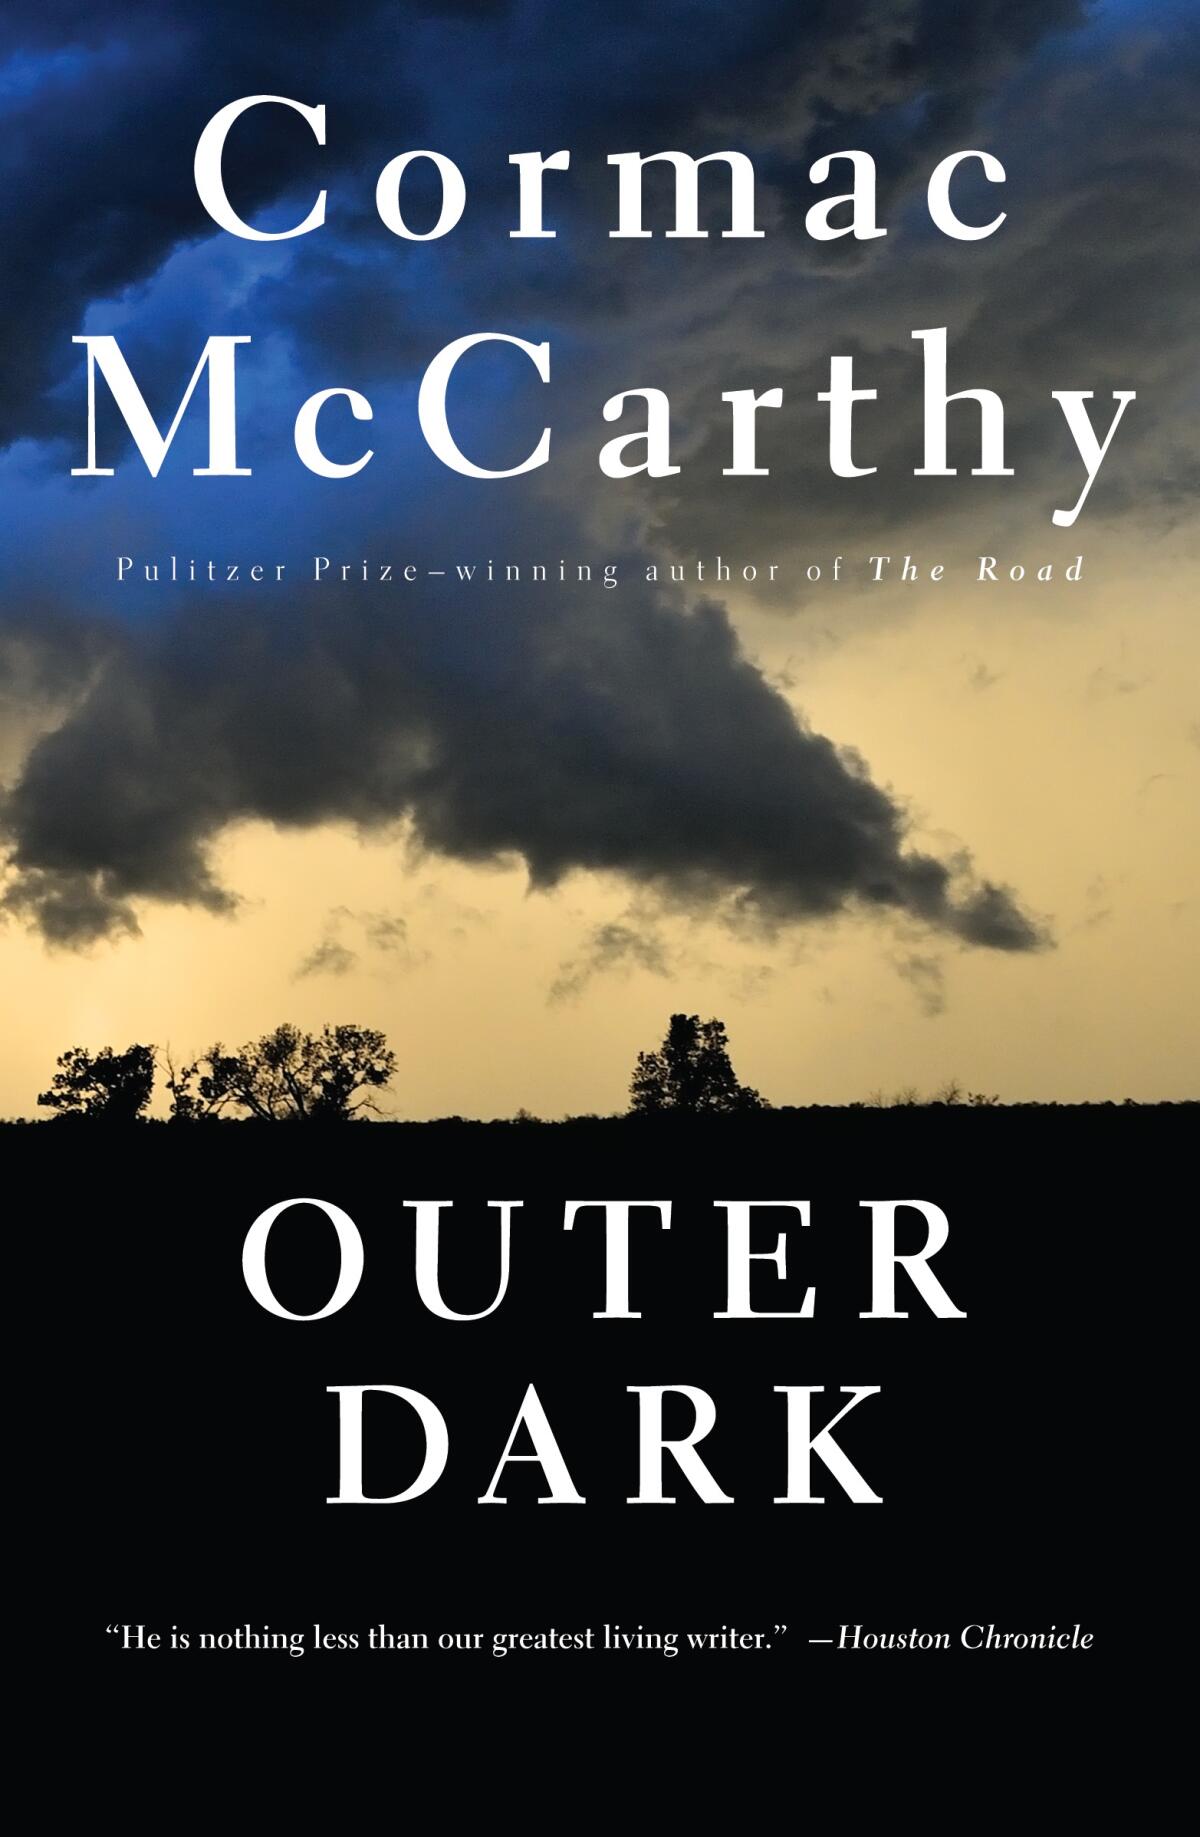 'Outer Dark,' by Cormac McCarthy